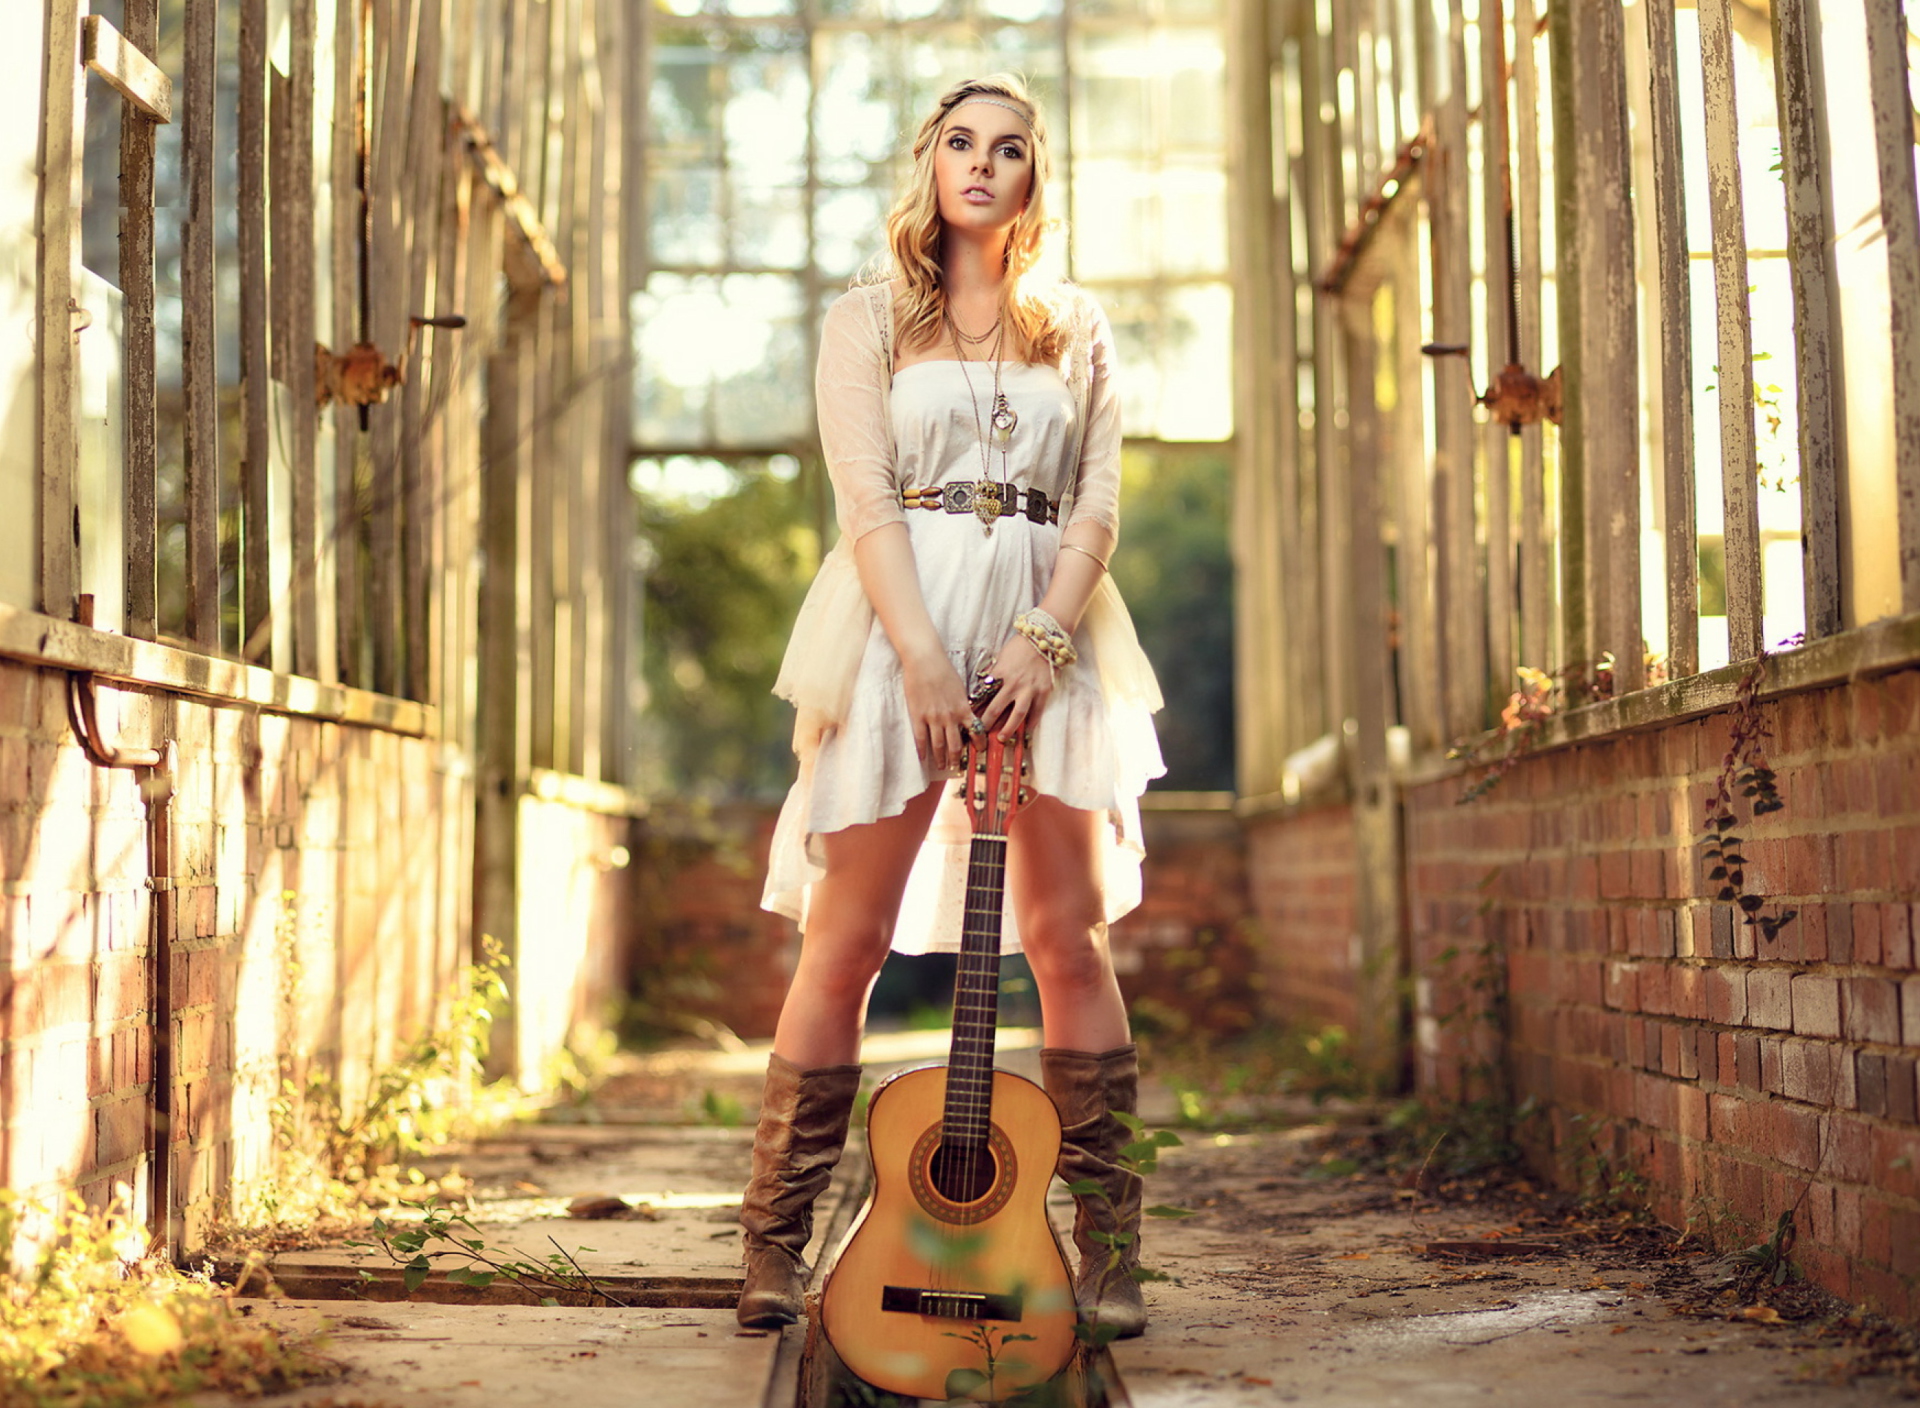 Girl With Guitar Chic Country Style wallpaper 1920x1408